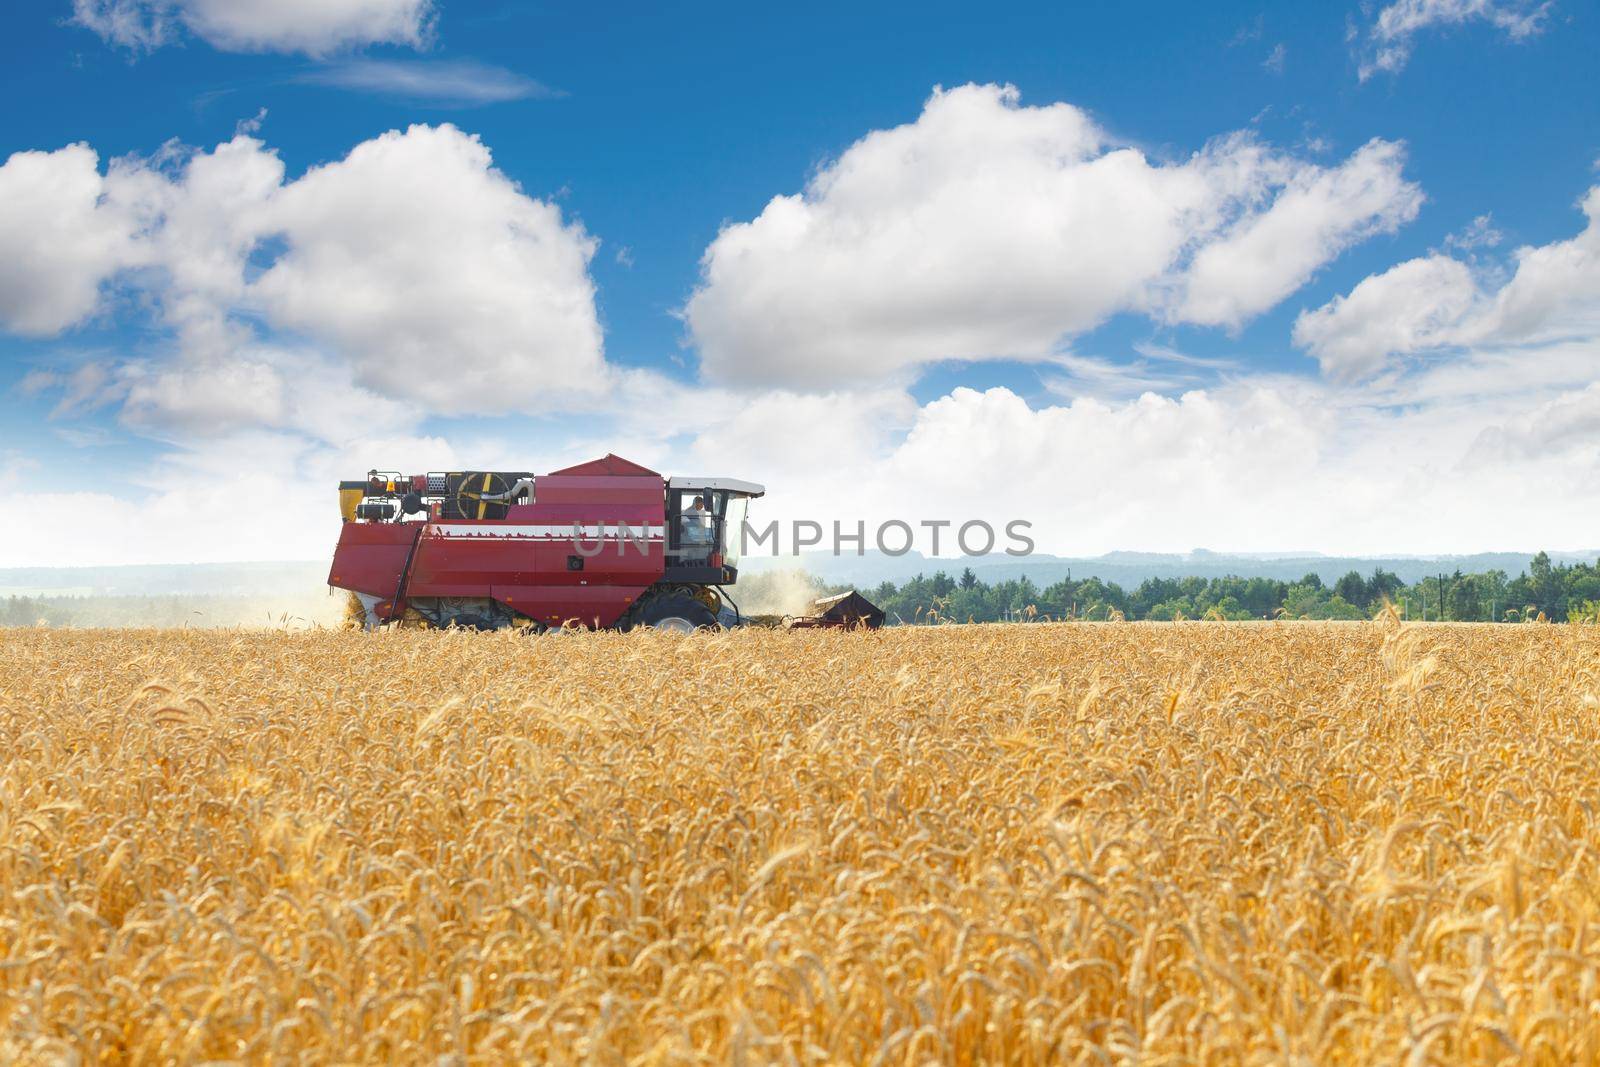 The harvester is bulk harvested grain by BY-_-BY